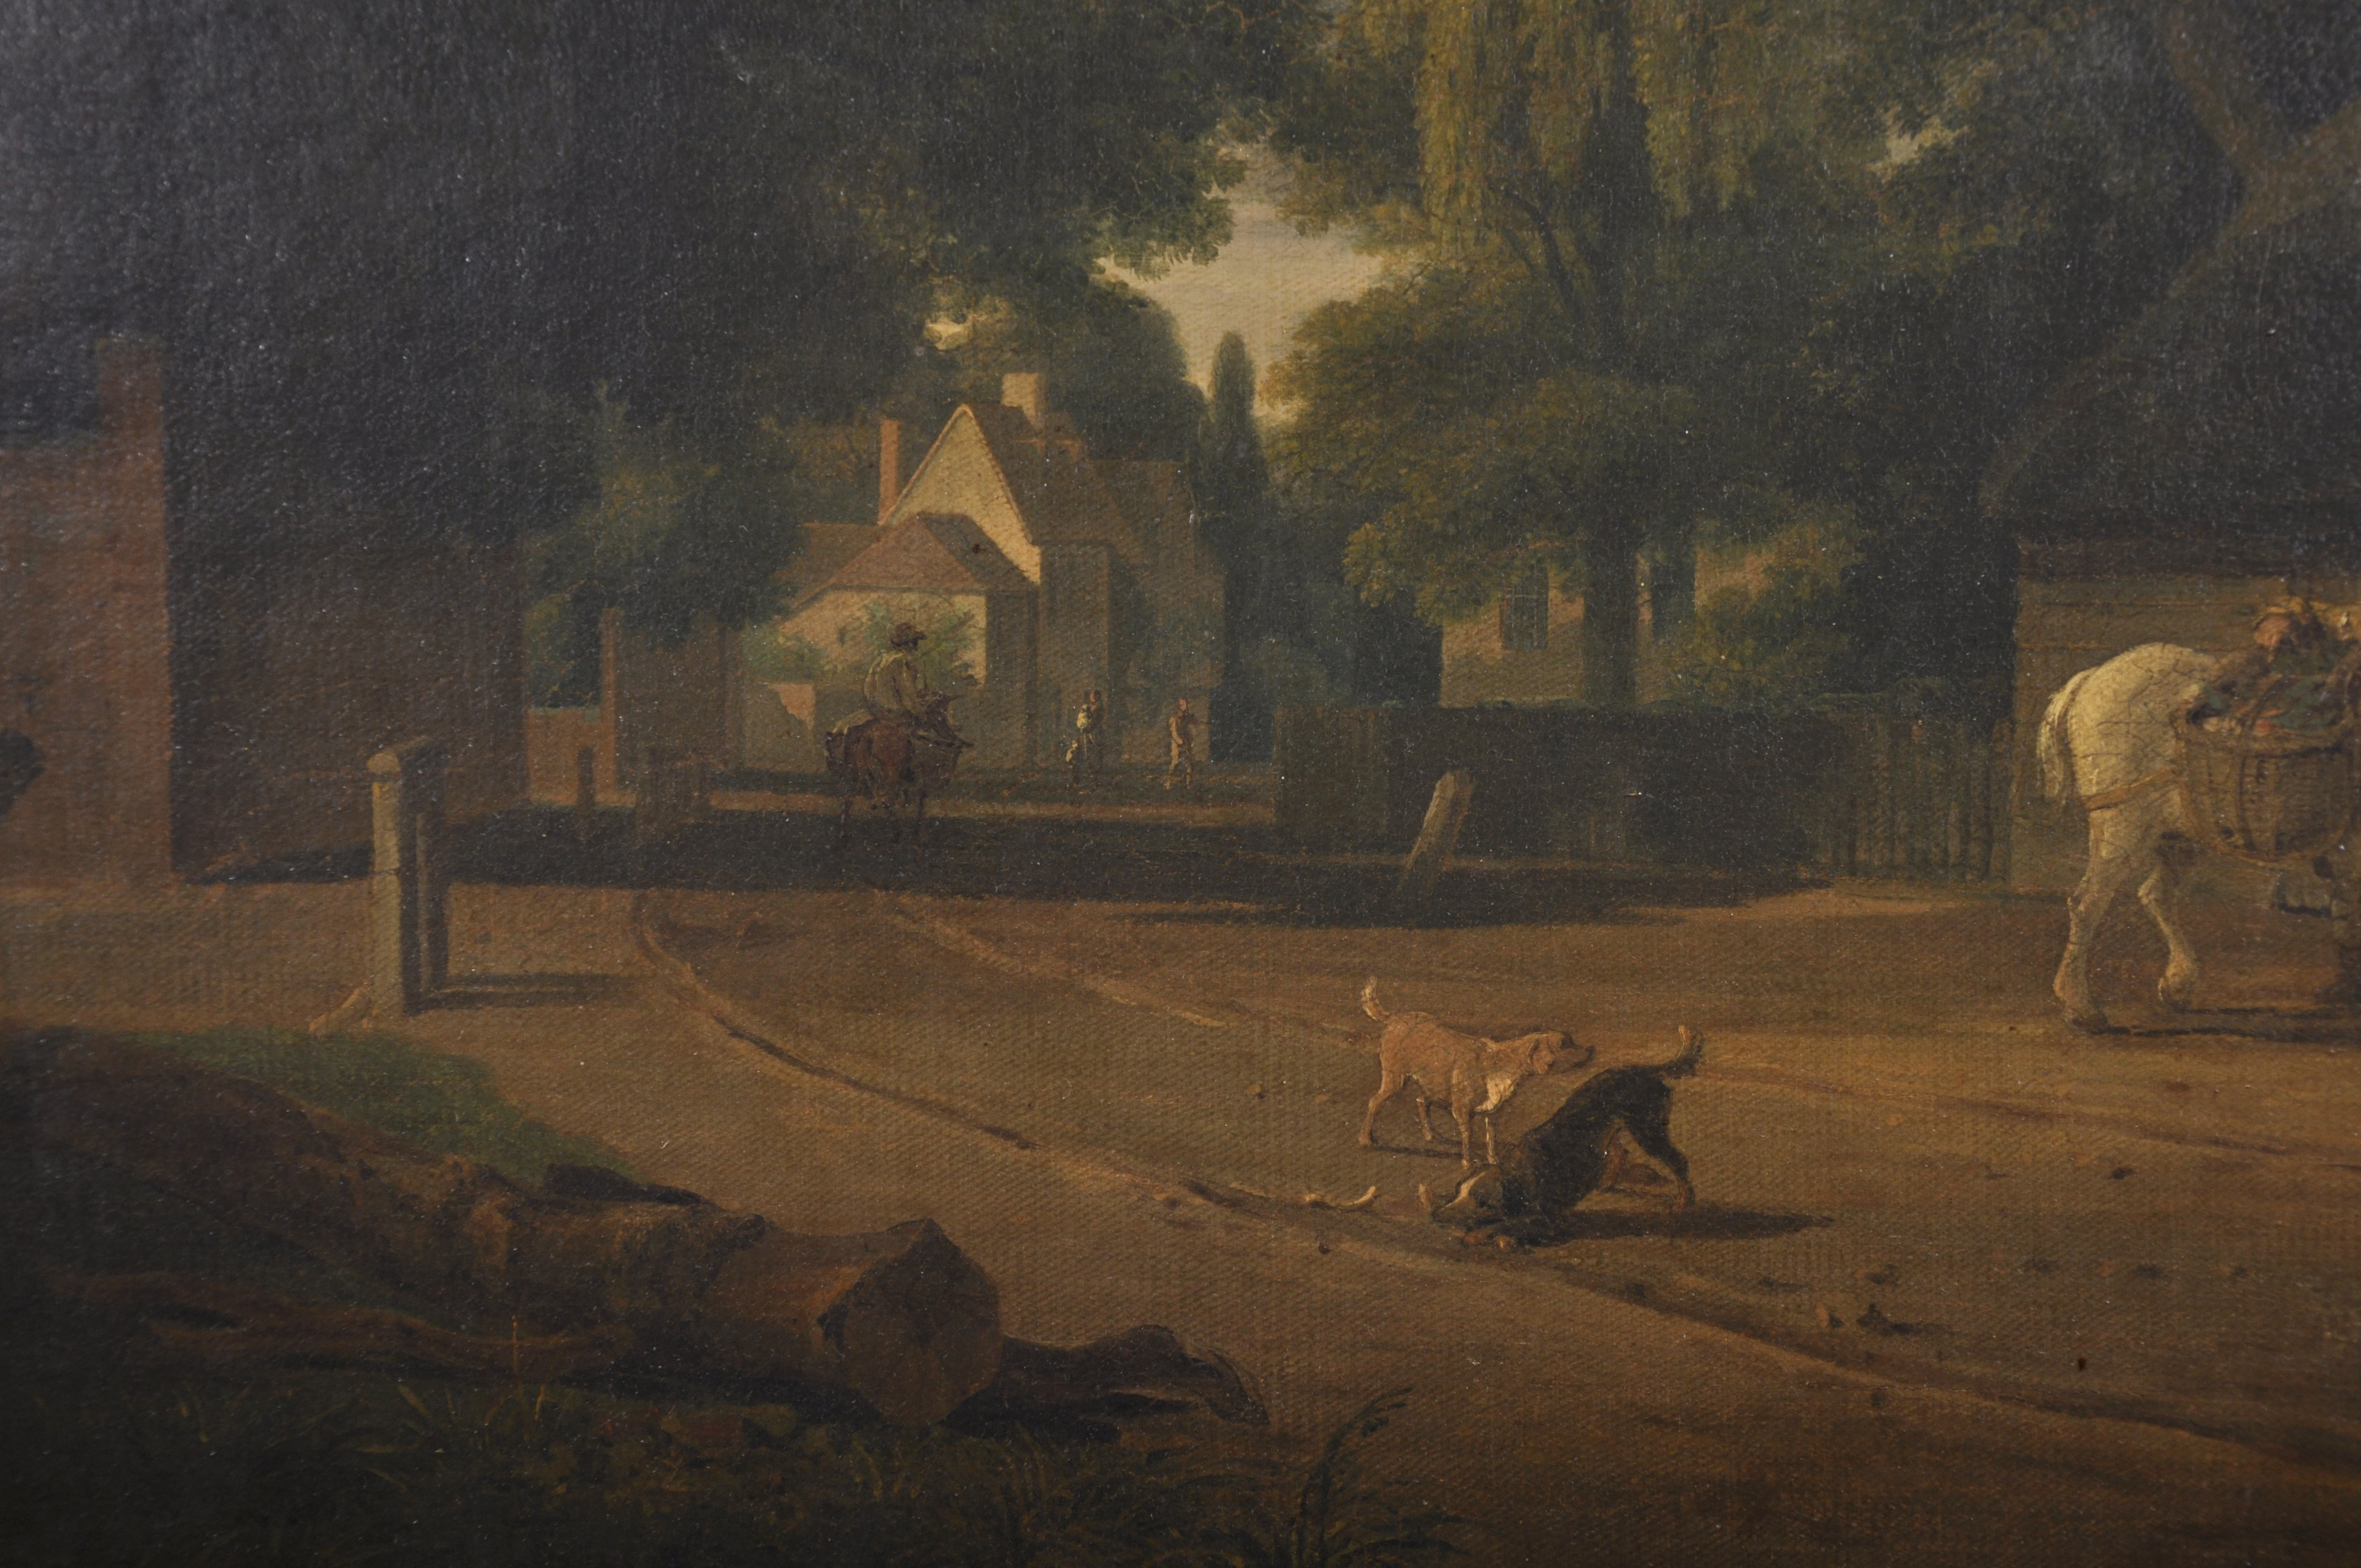 Andrew Wilson (1780-1848) British. “A View of The Bell Inn Hurley, Herts”, with Figures and Dogs - Image 3 of 9